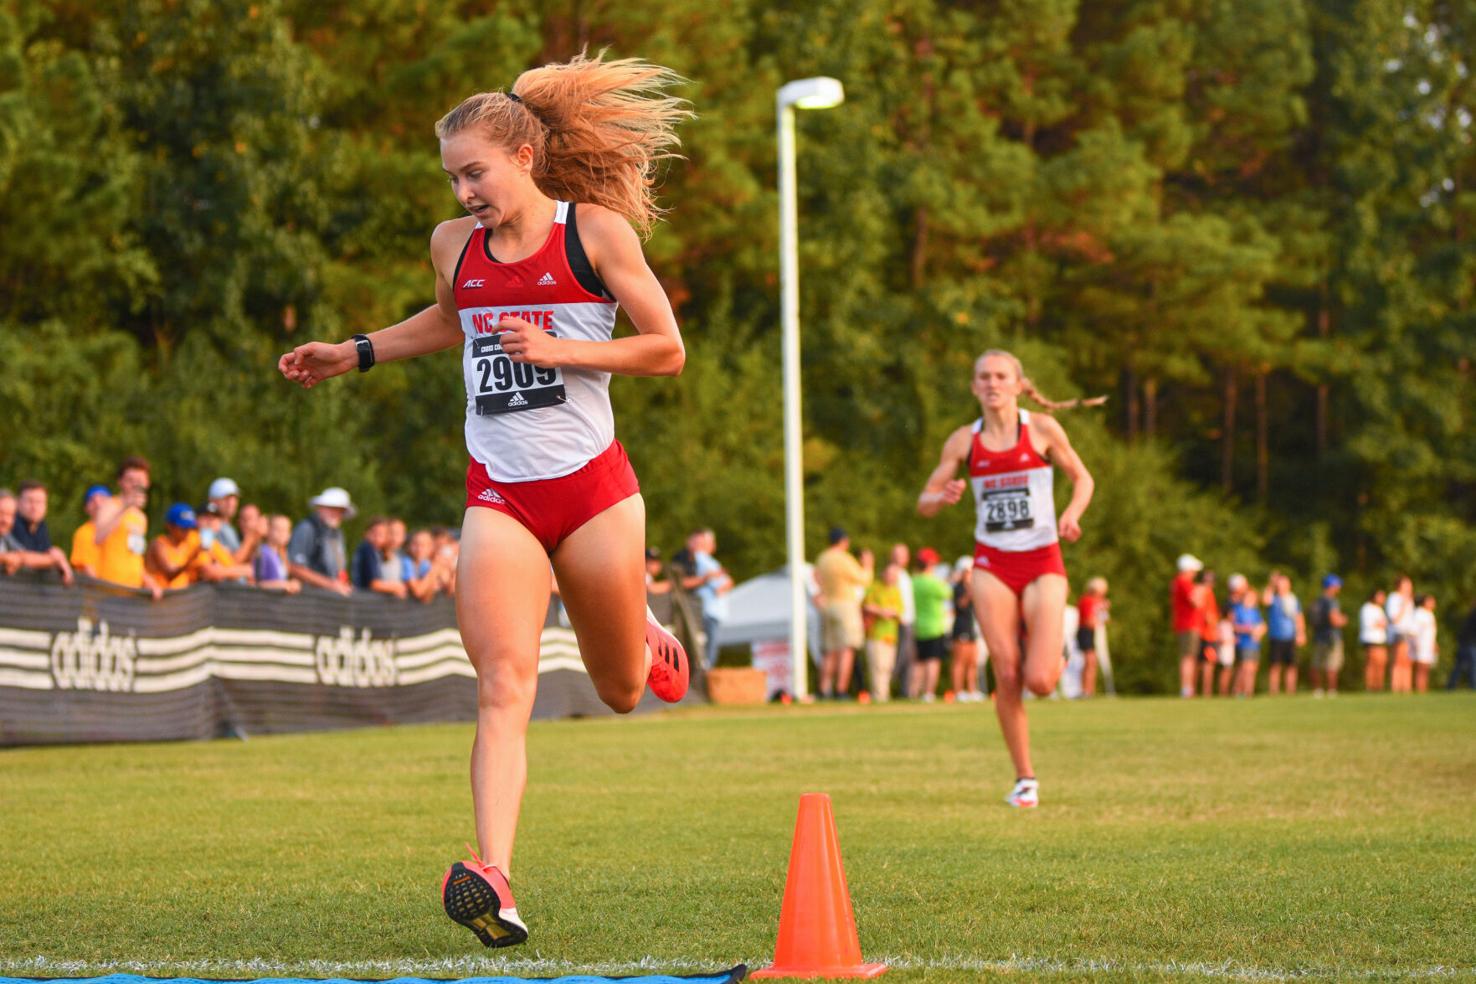 Katelyn Tuohy takes home national title at NCAA Track and Field